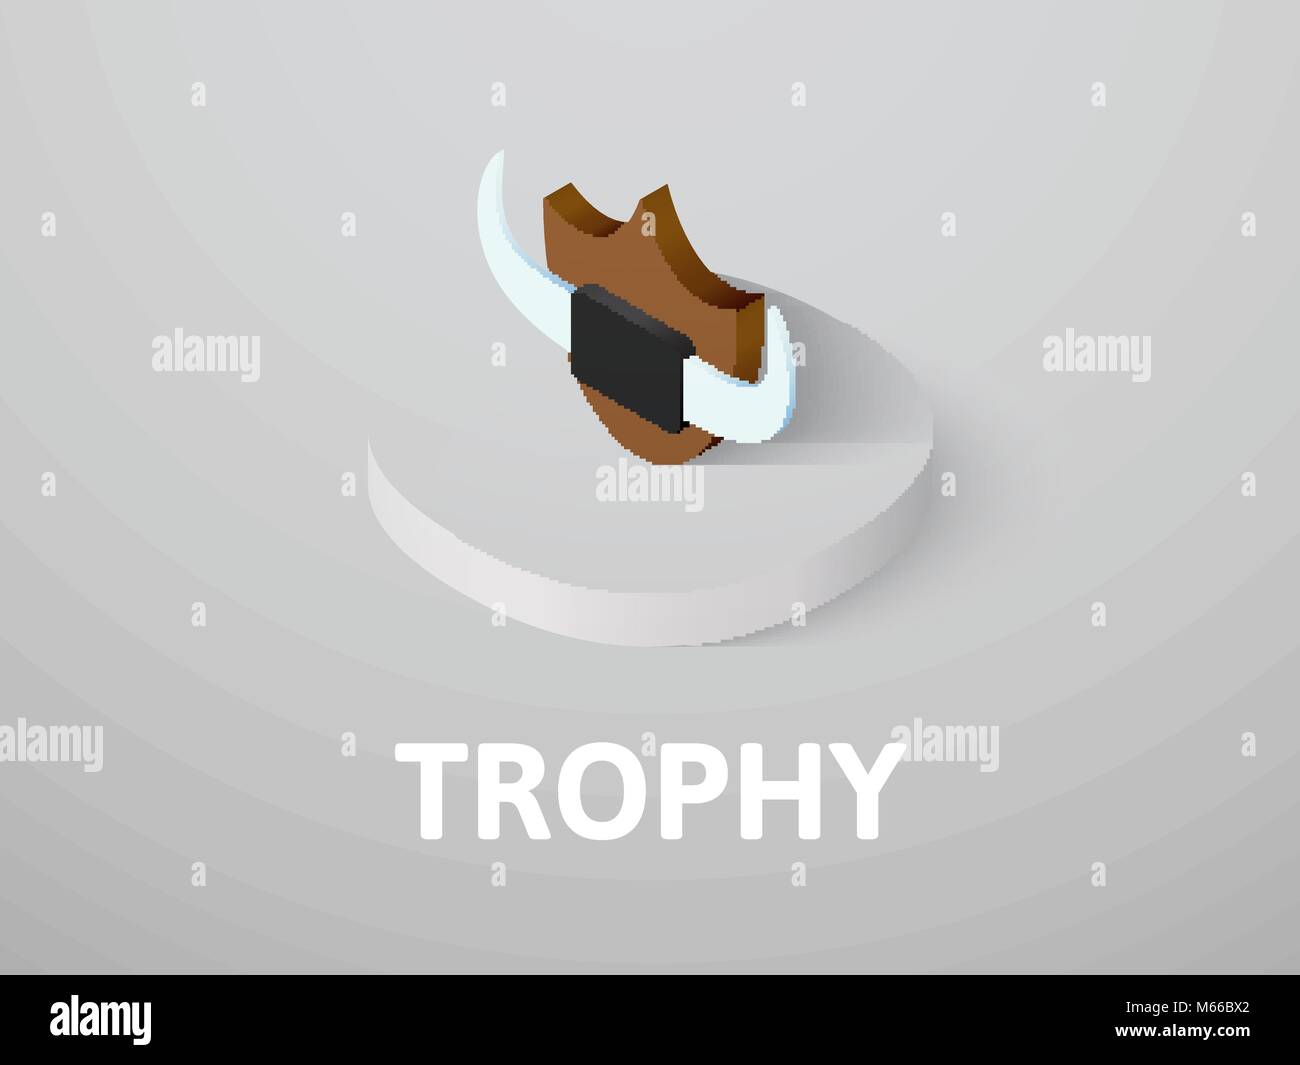 Trophy isometric icon, isolated on color background Stock Vector